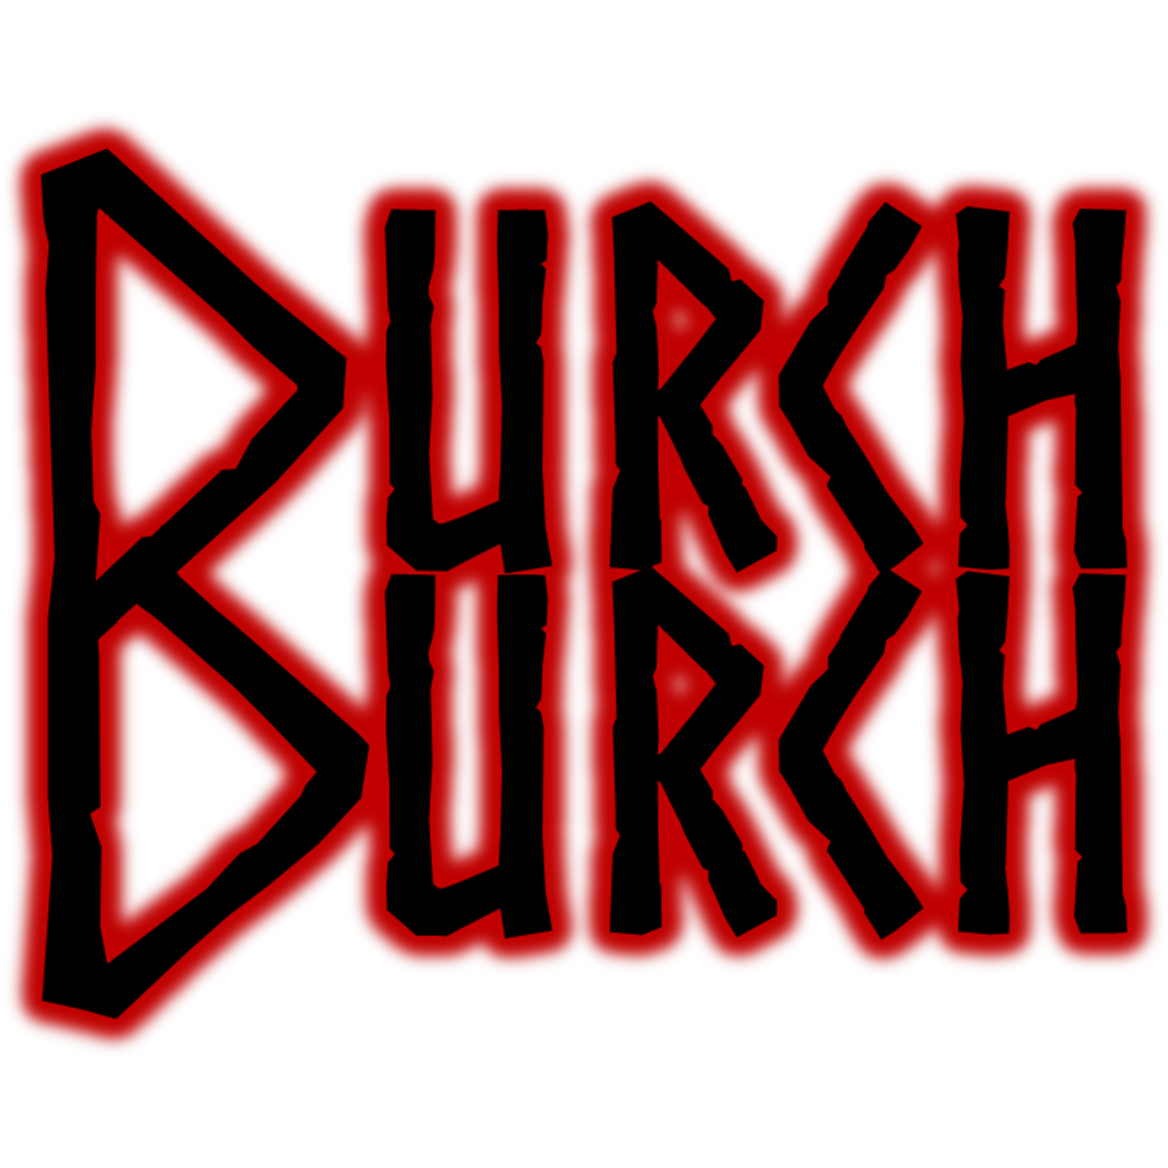 The first official DurchBurch logo.  It makes use of a stacked structure where the top half of the B is initially read as a D, but the full B is read when reading the lower half of the stack.